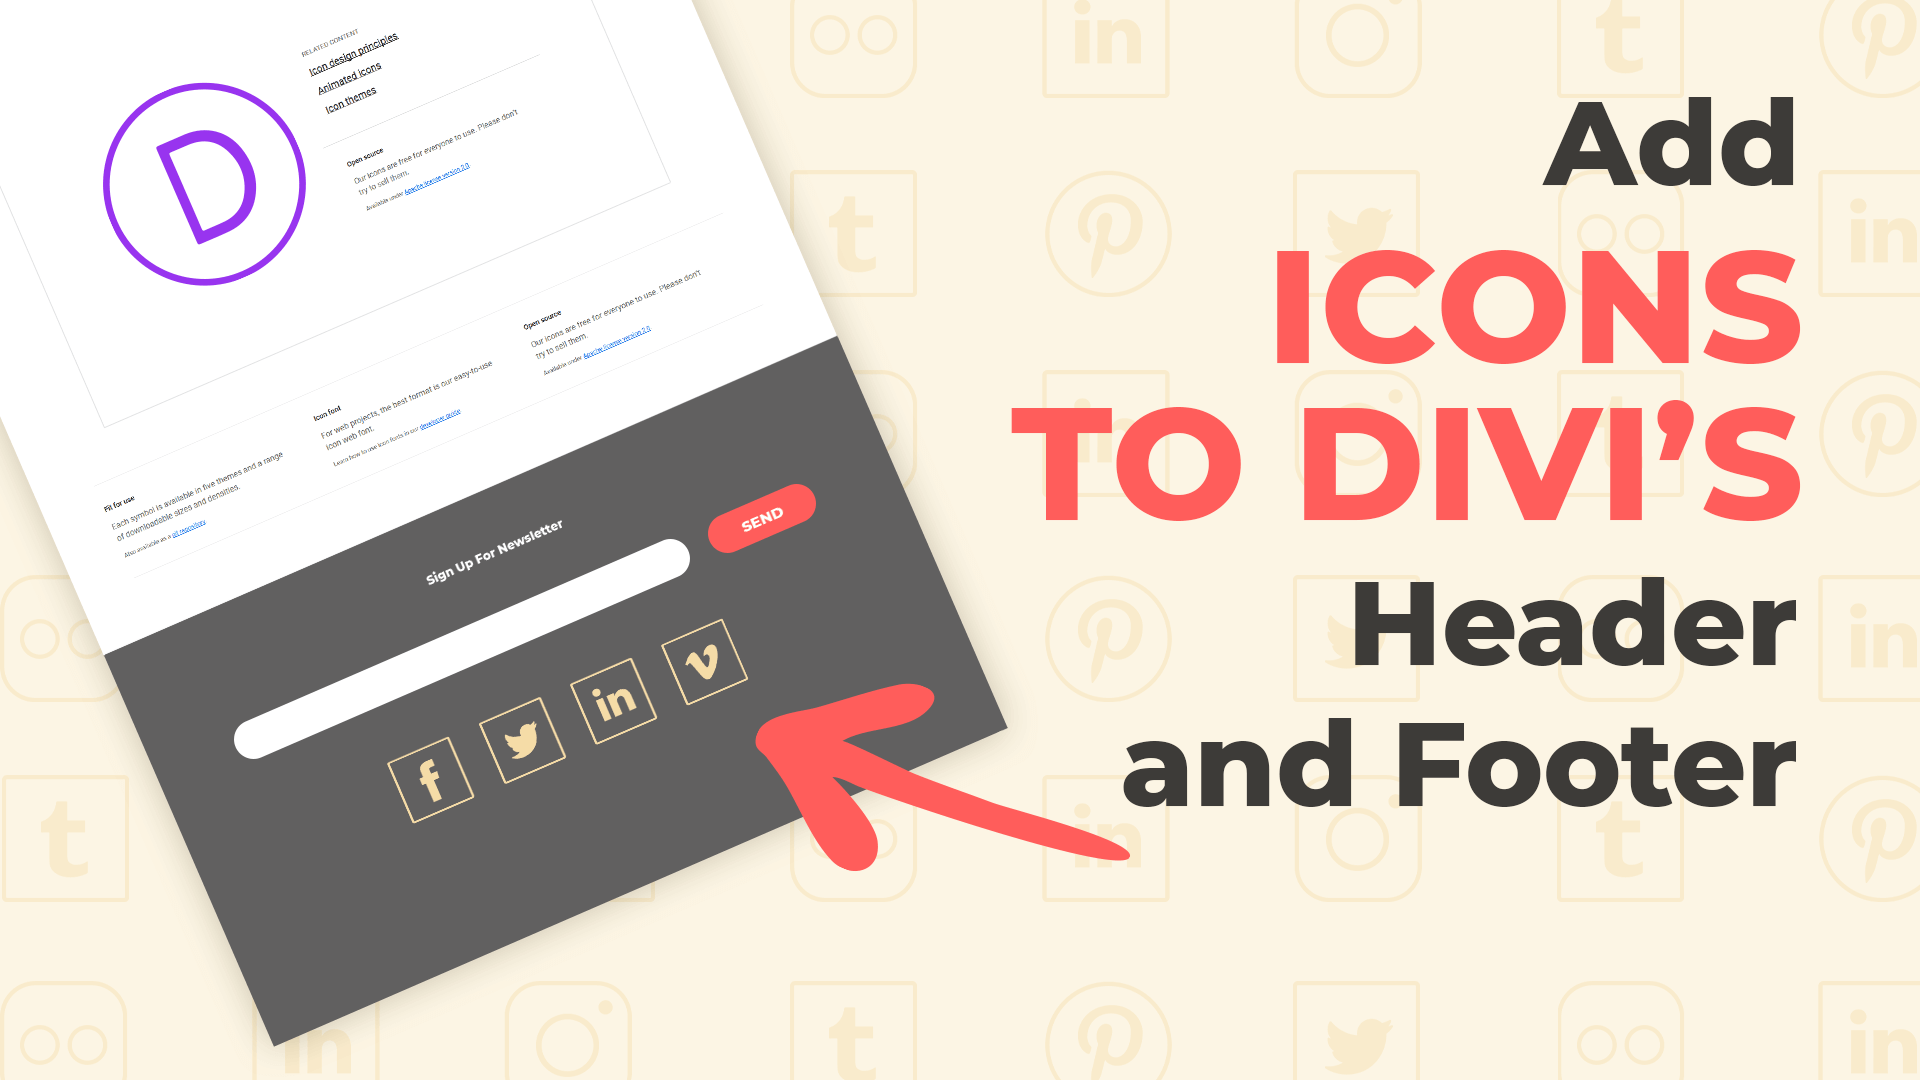 How To Add More Social Media Icons to Divi’s Header and Footer